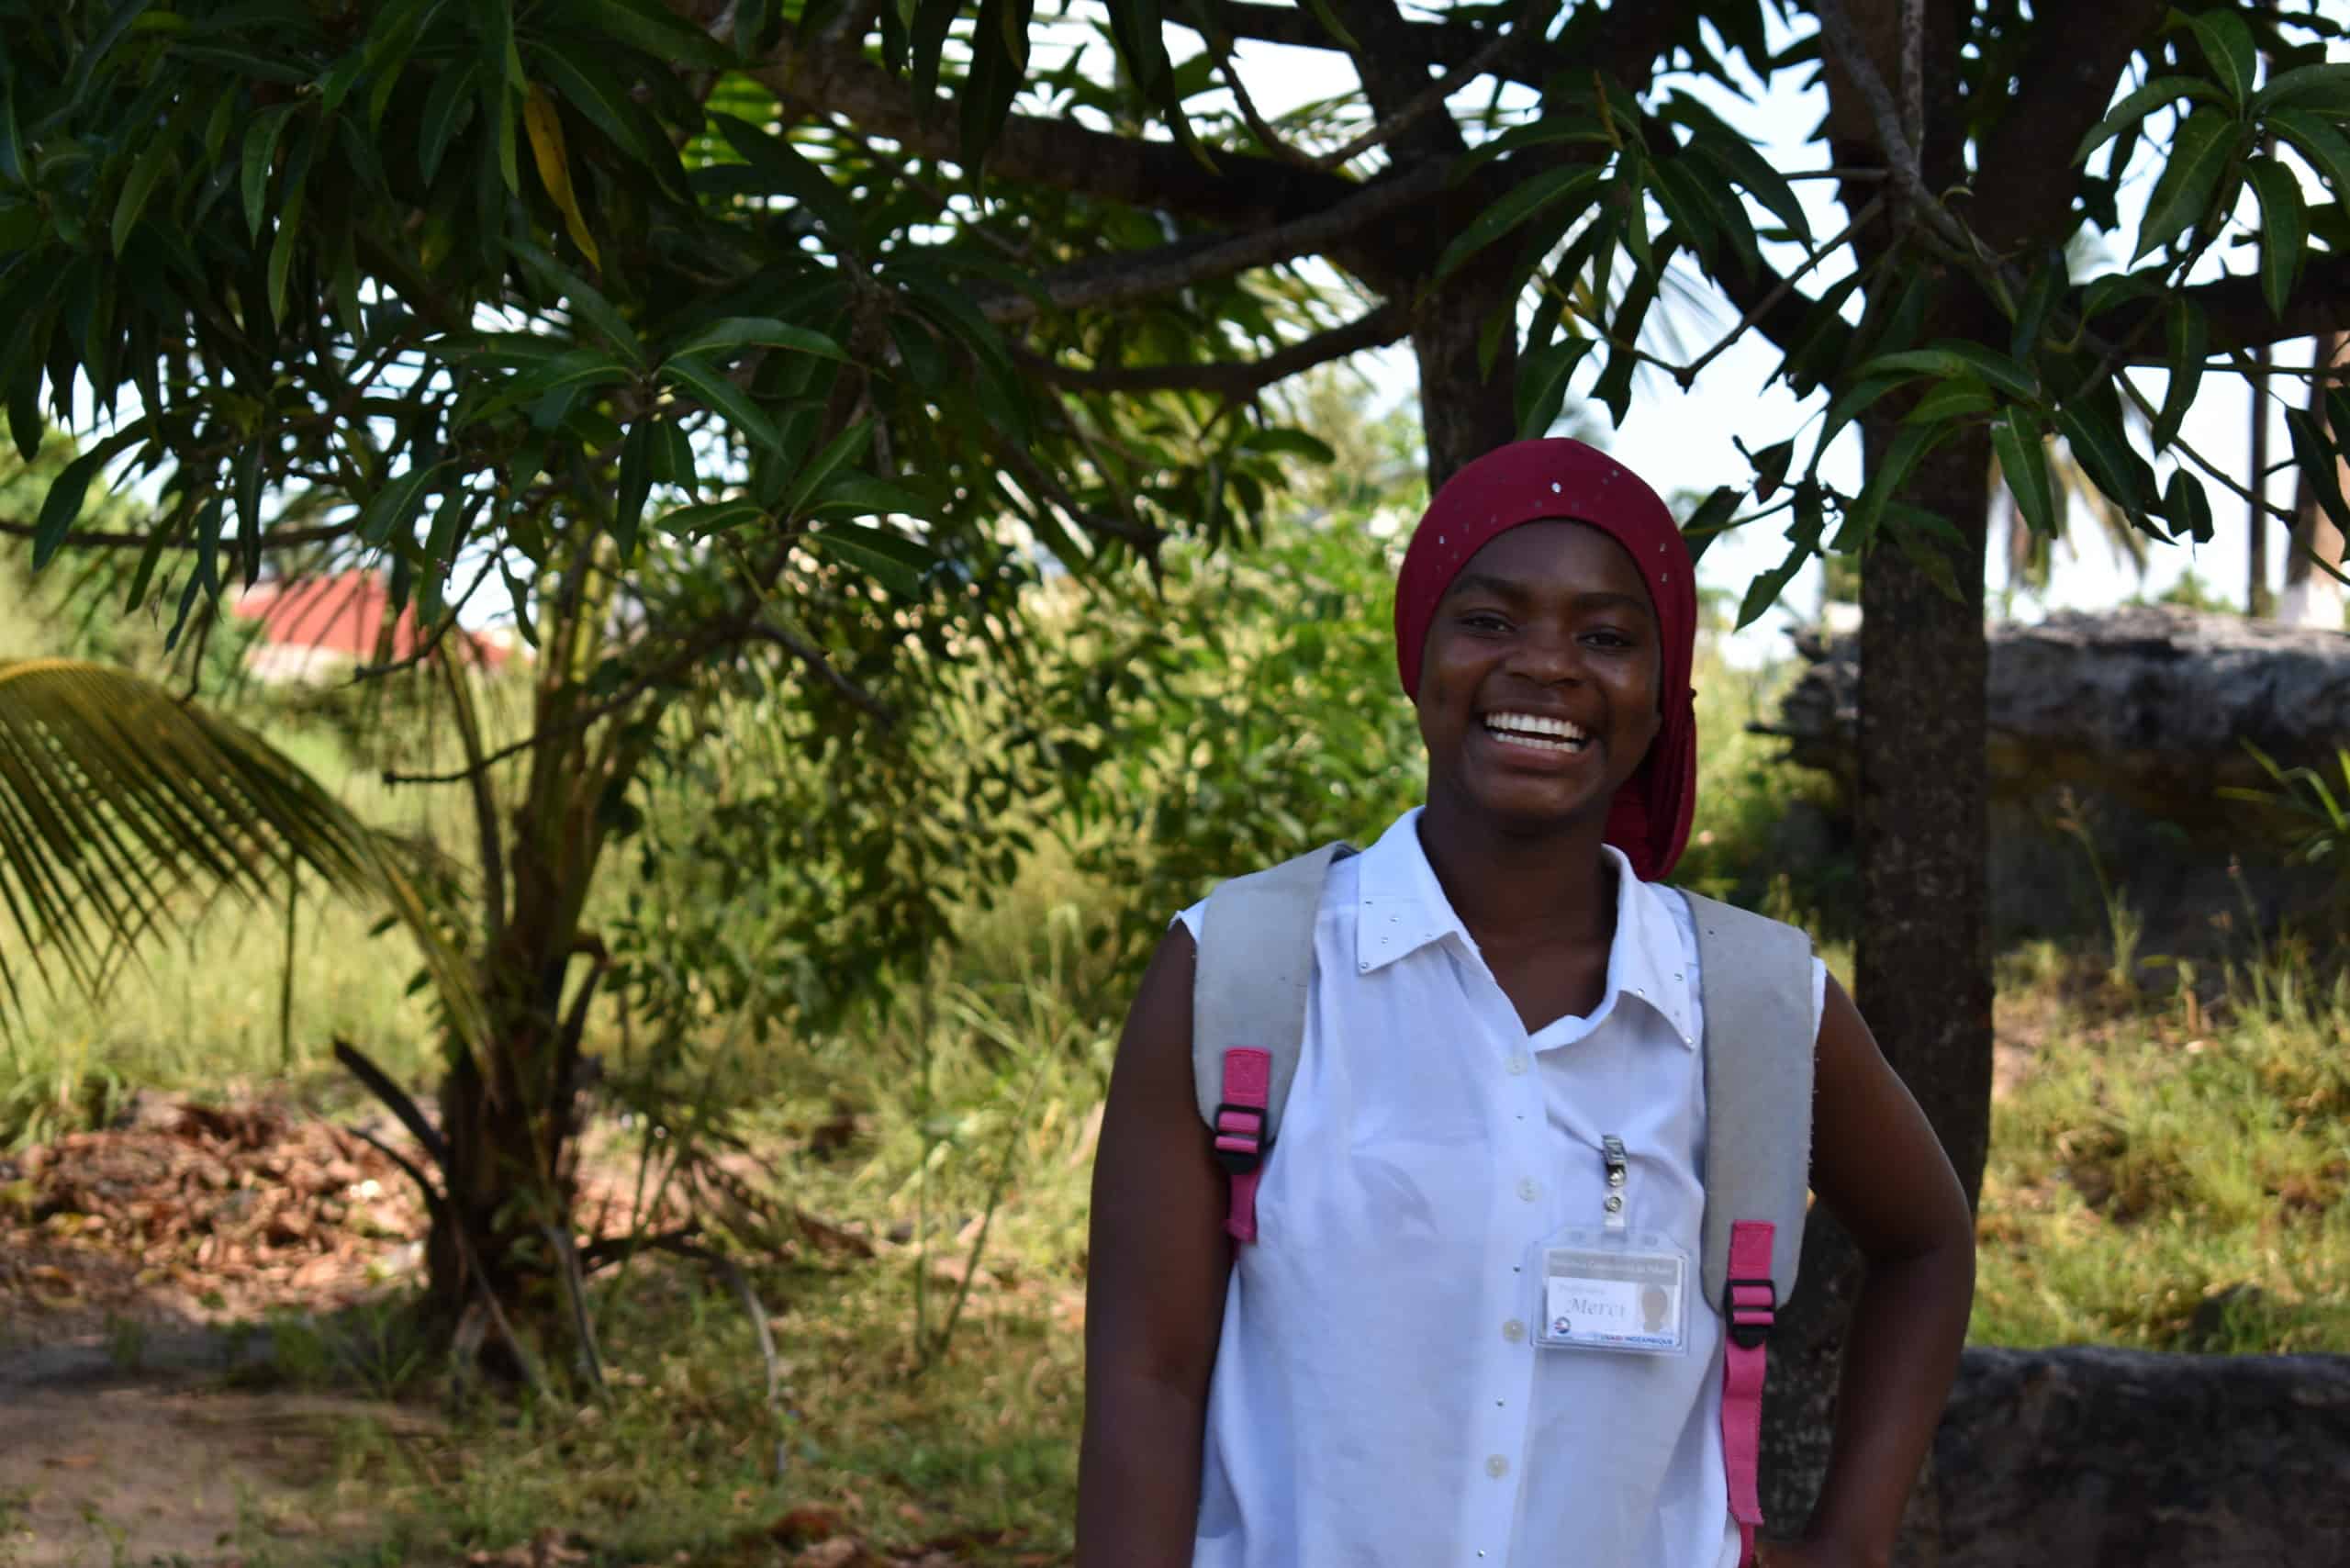 A female student from Mozambique poses for a photo.